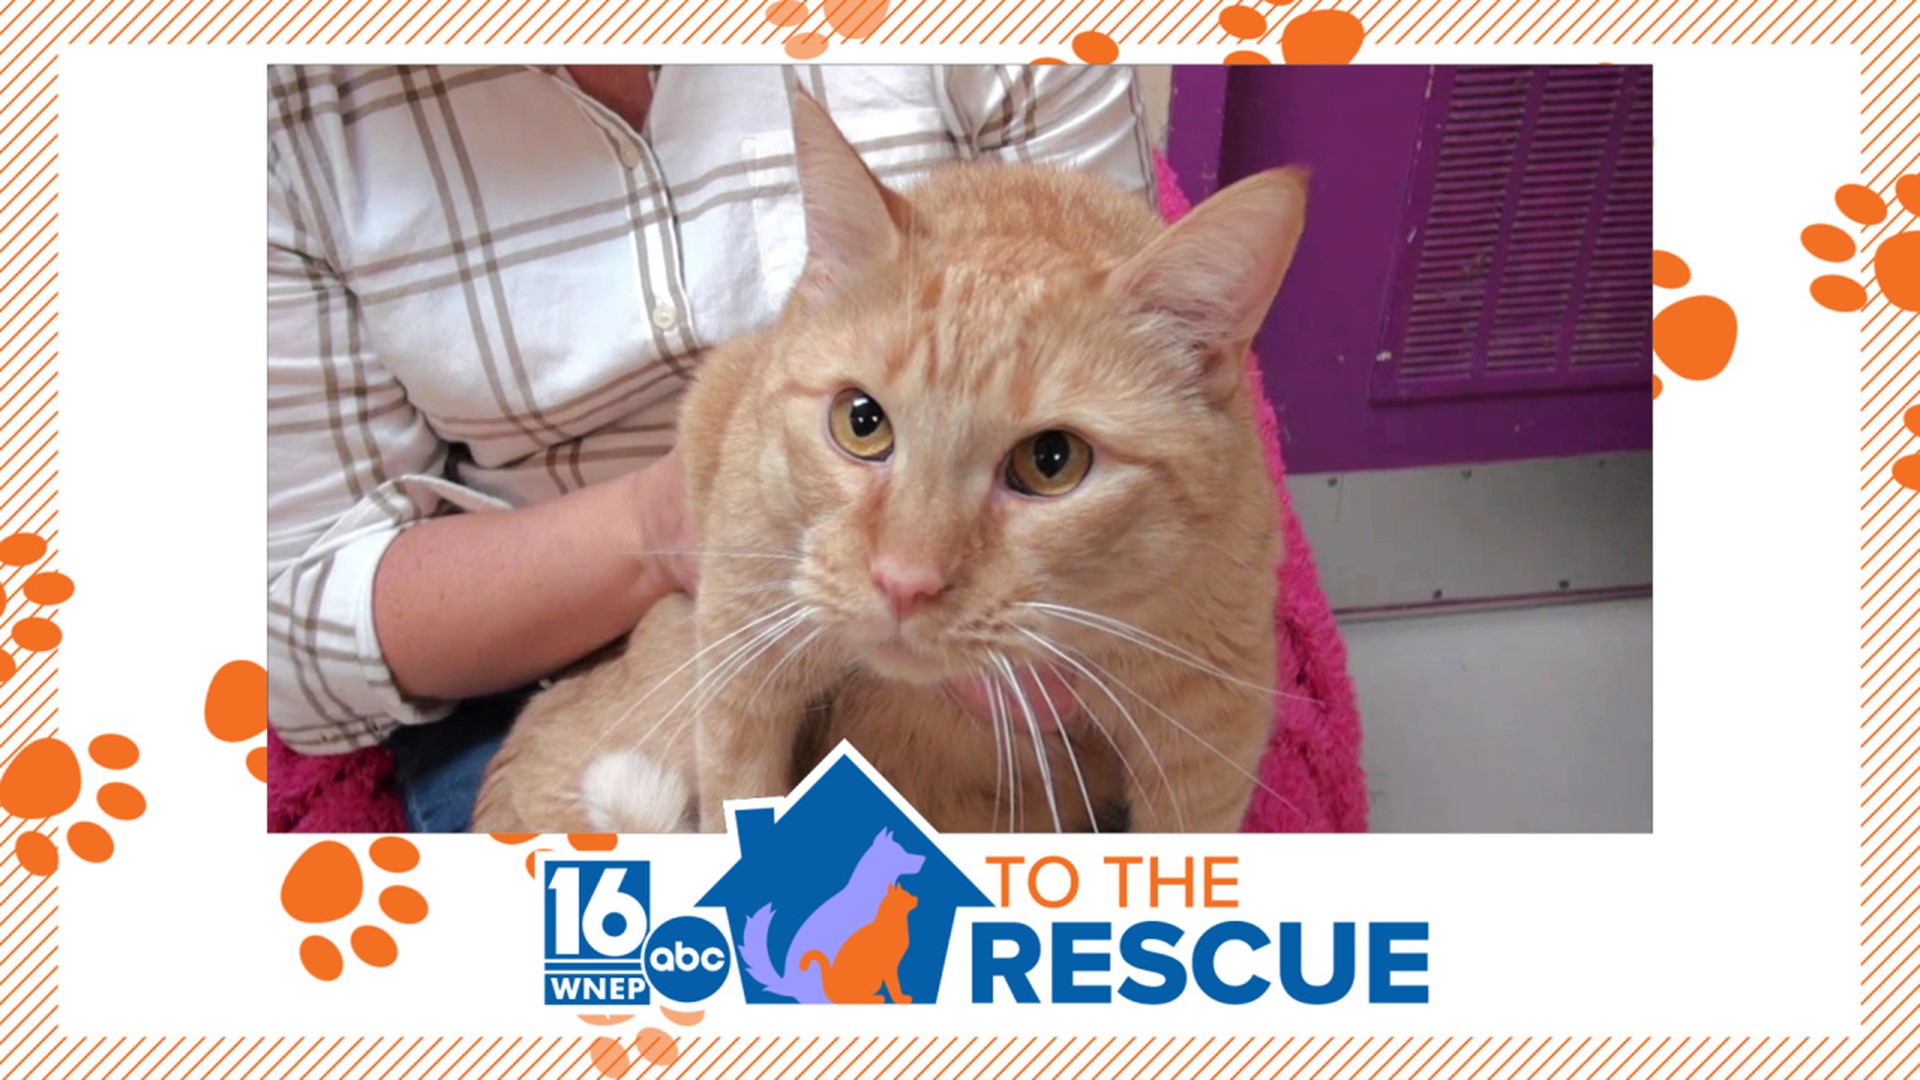 In this week's 16 To The Rescue we meet an older cat who was surrendered by his owner, and after months of getting to know him, rescue workers just don't know why.